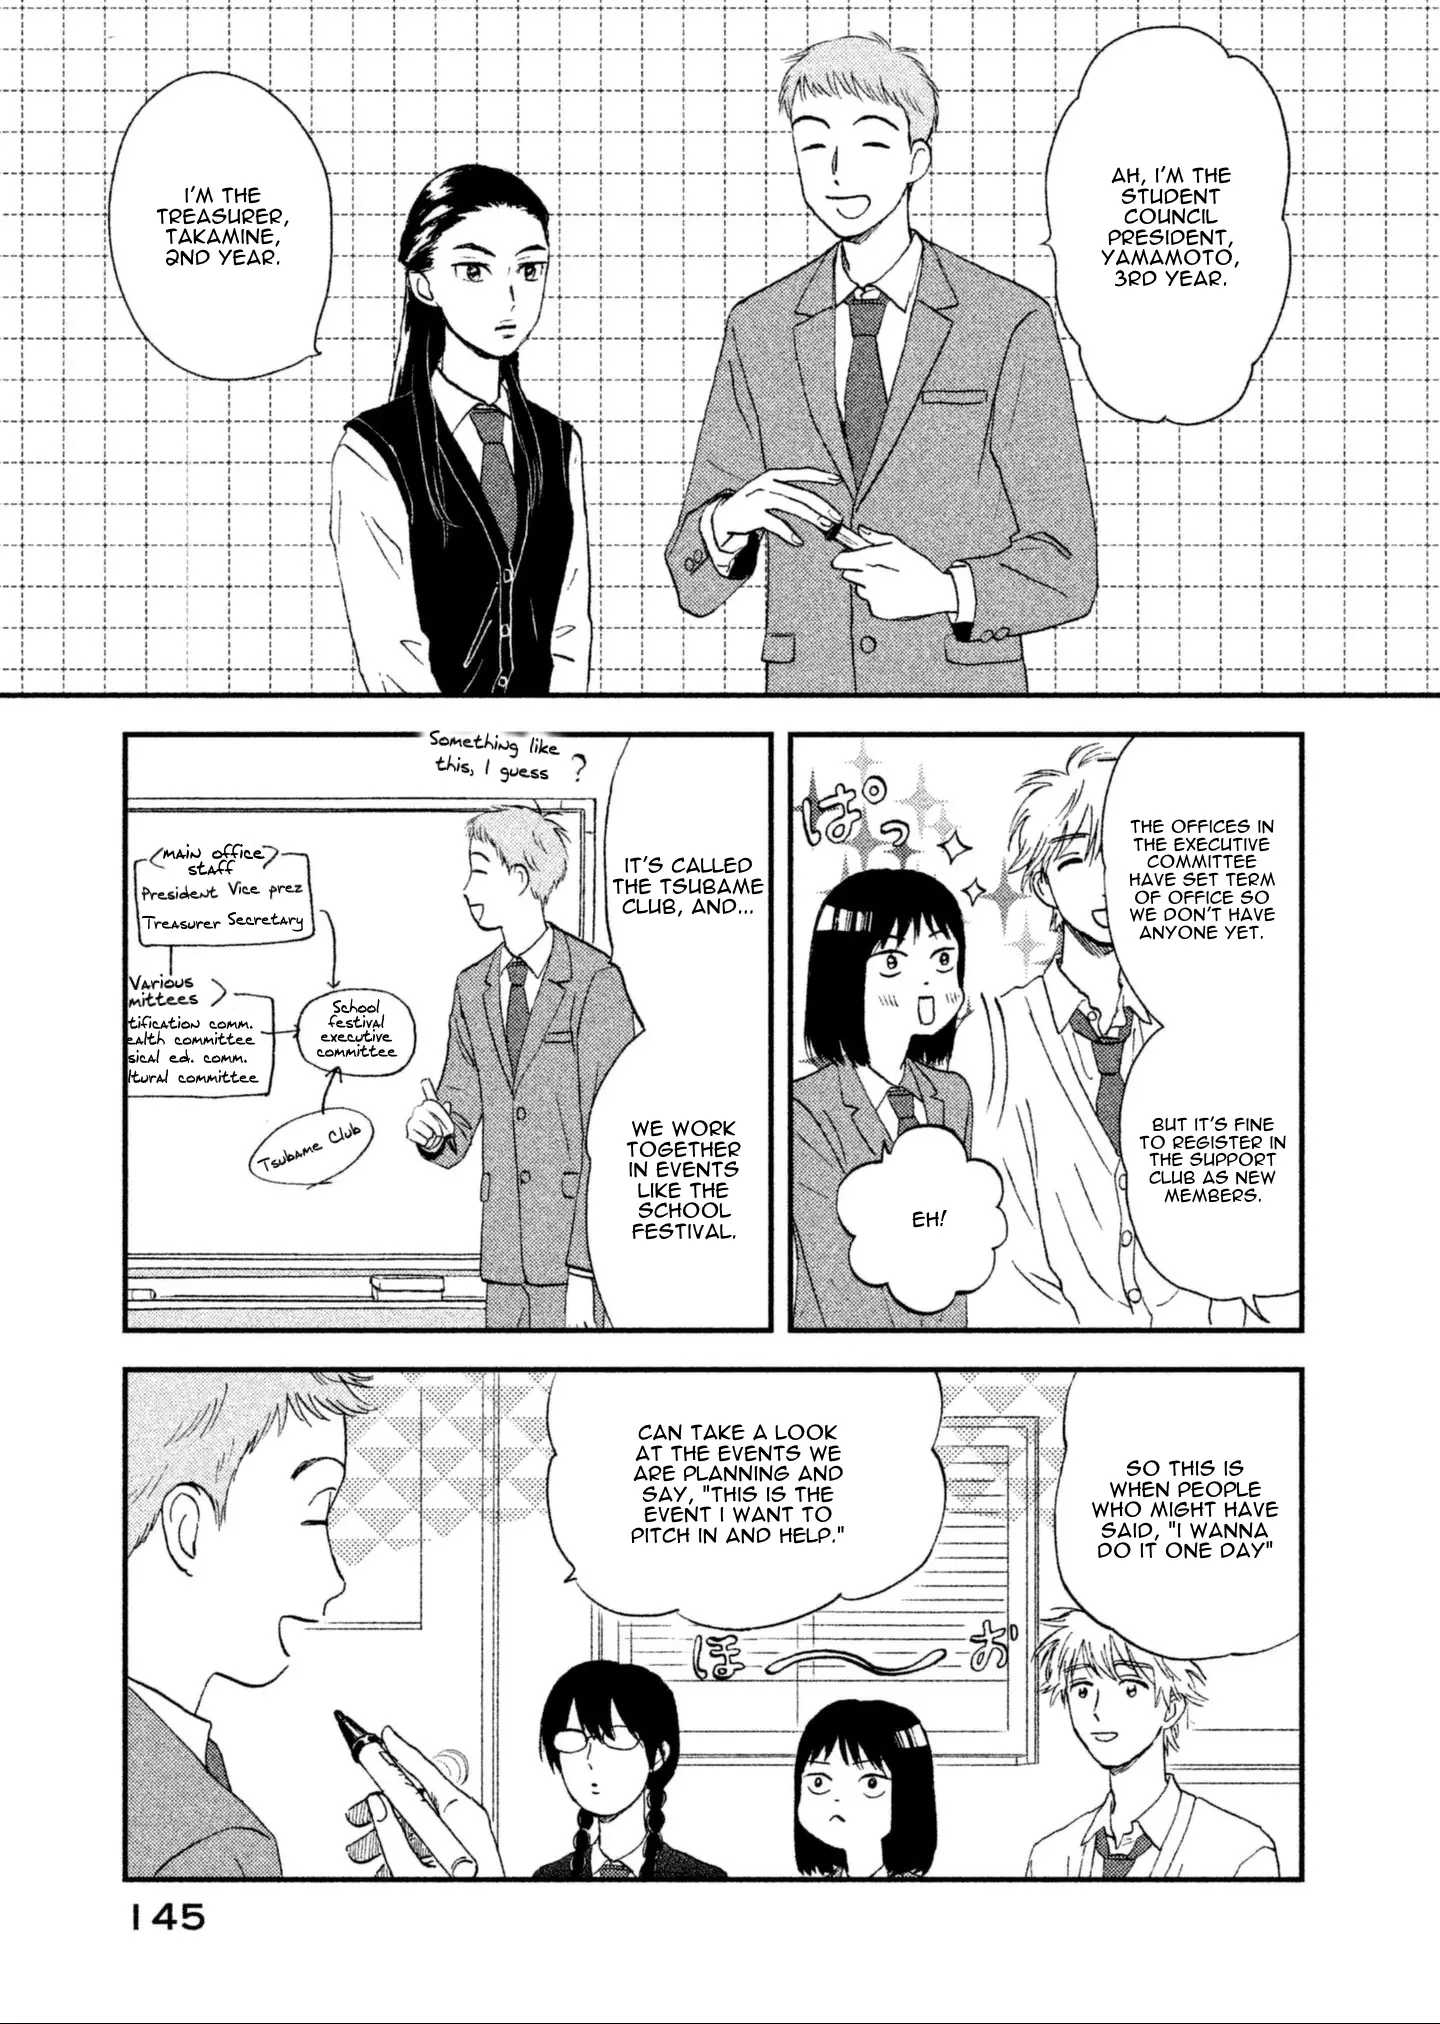 Read Skip To Loafer Chapter 23.5: Volume 4 Omake - Mangadex